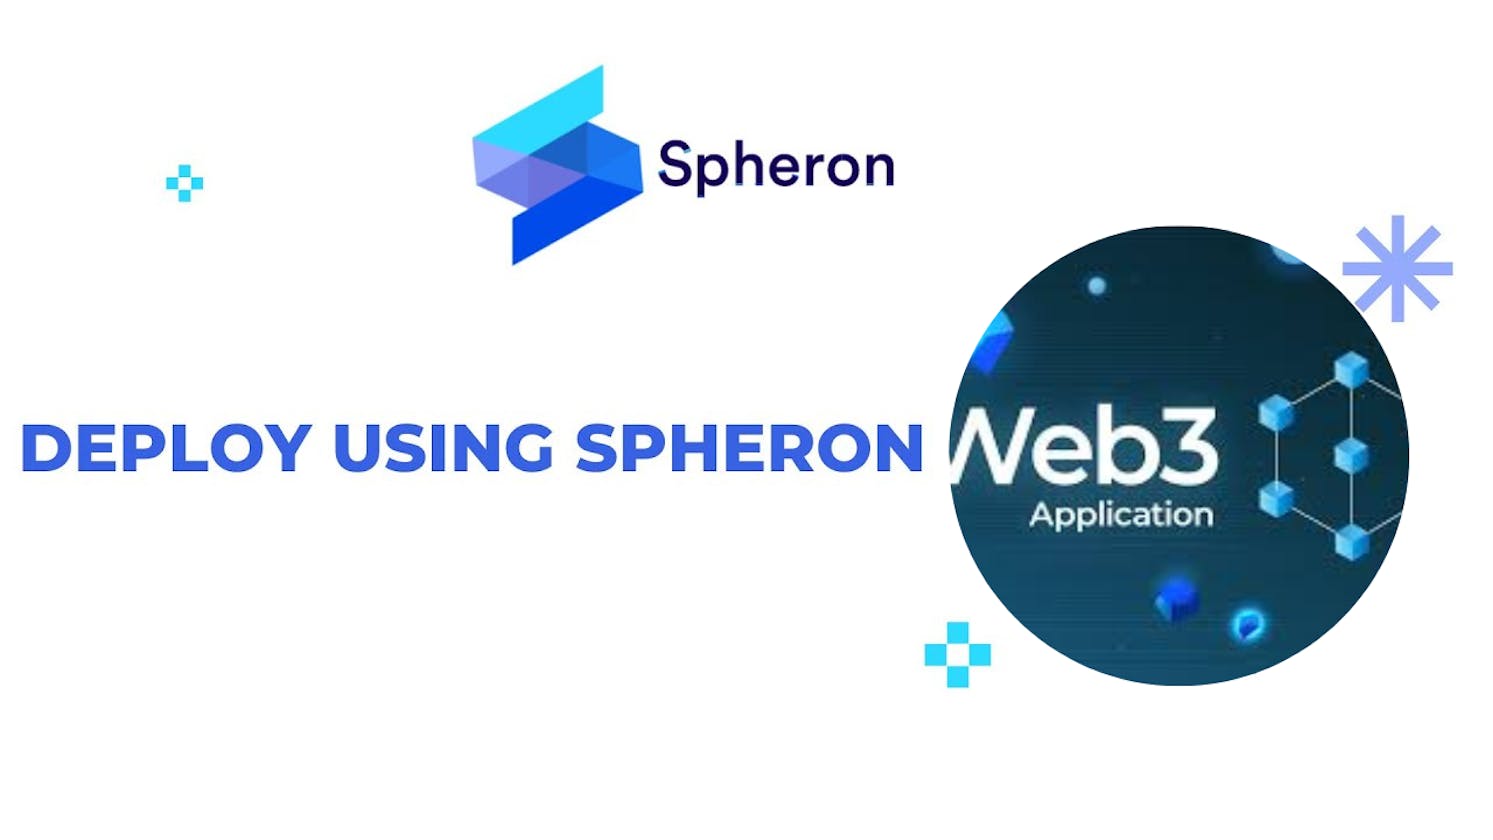 Deploying a Web3 Application on the Spheron